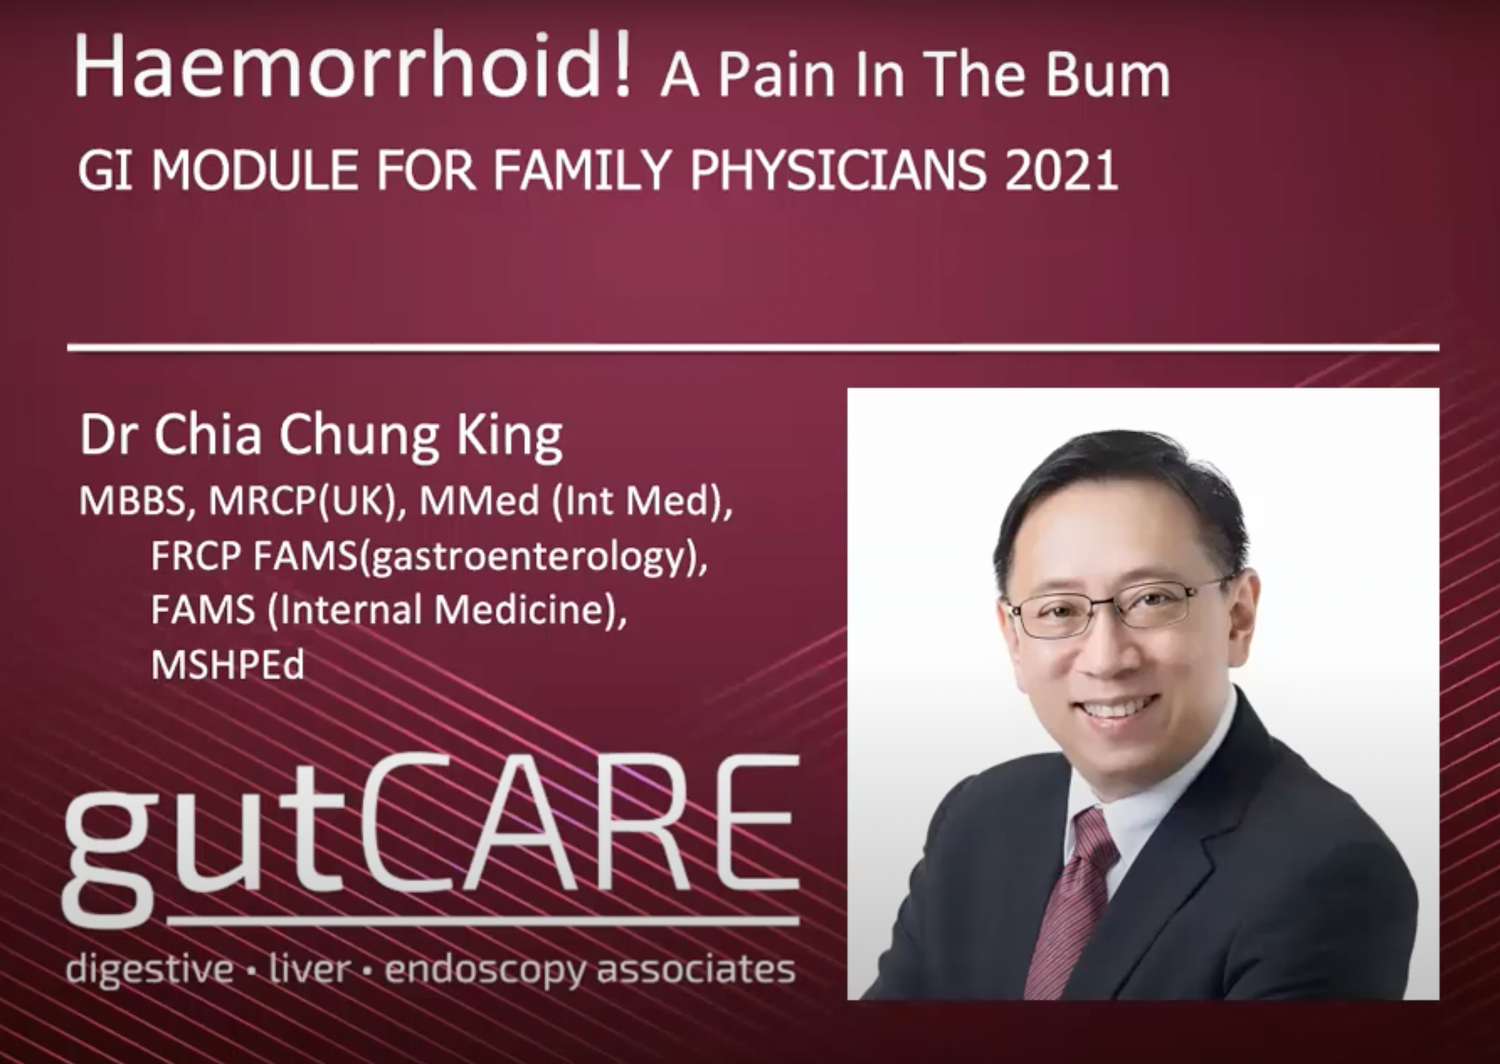 Lecture on Haemorrhoid to family physicians